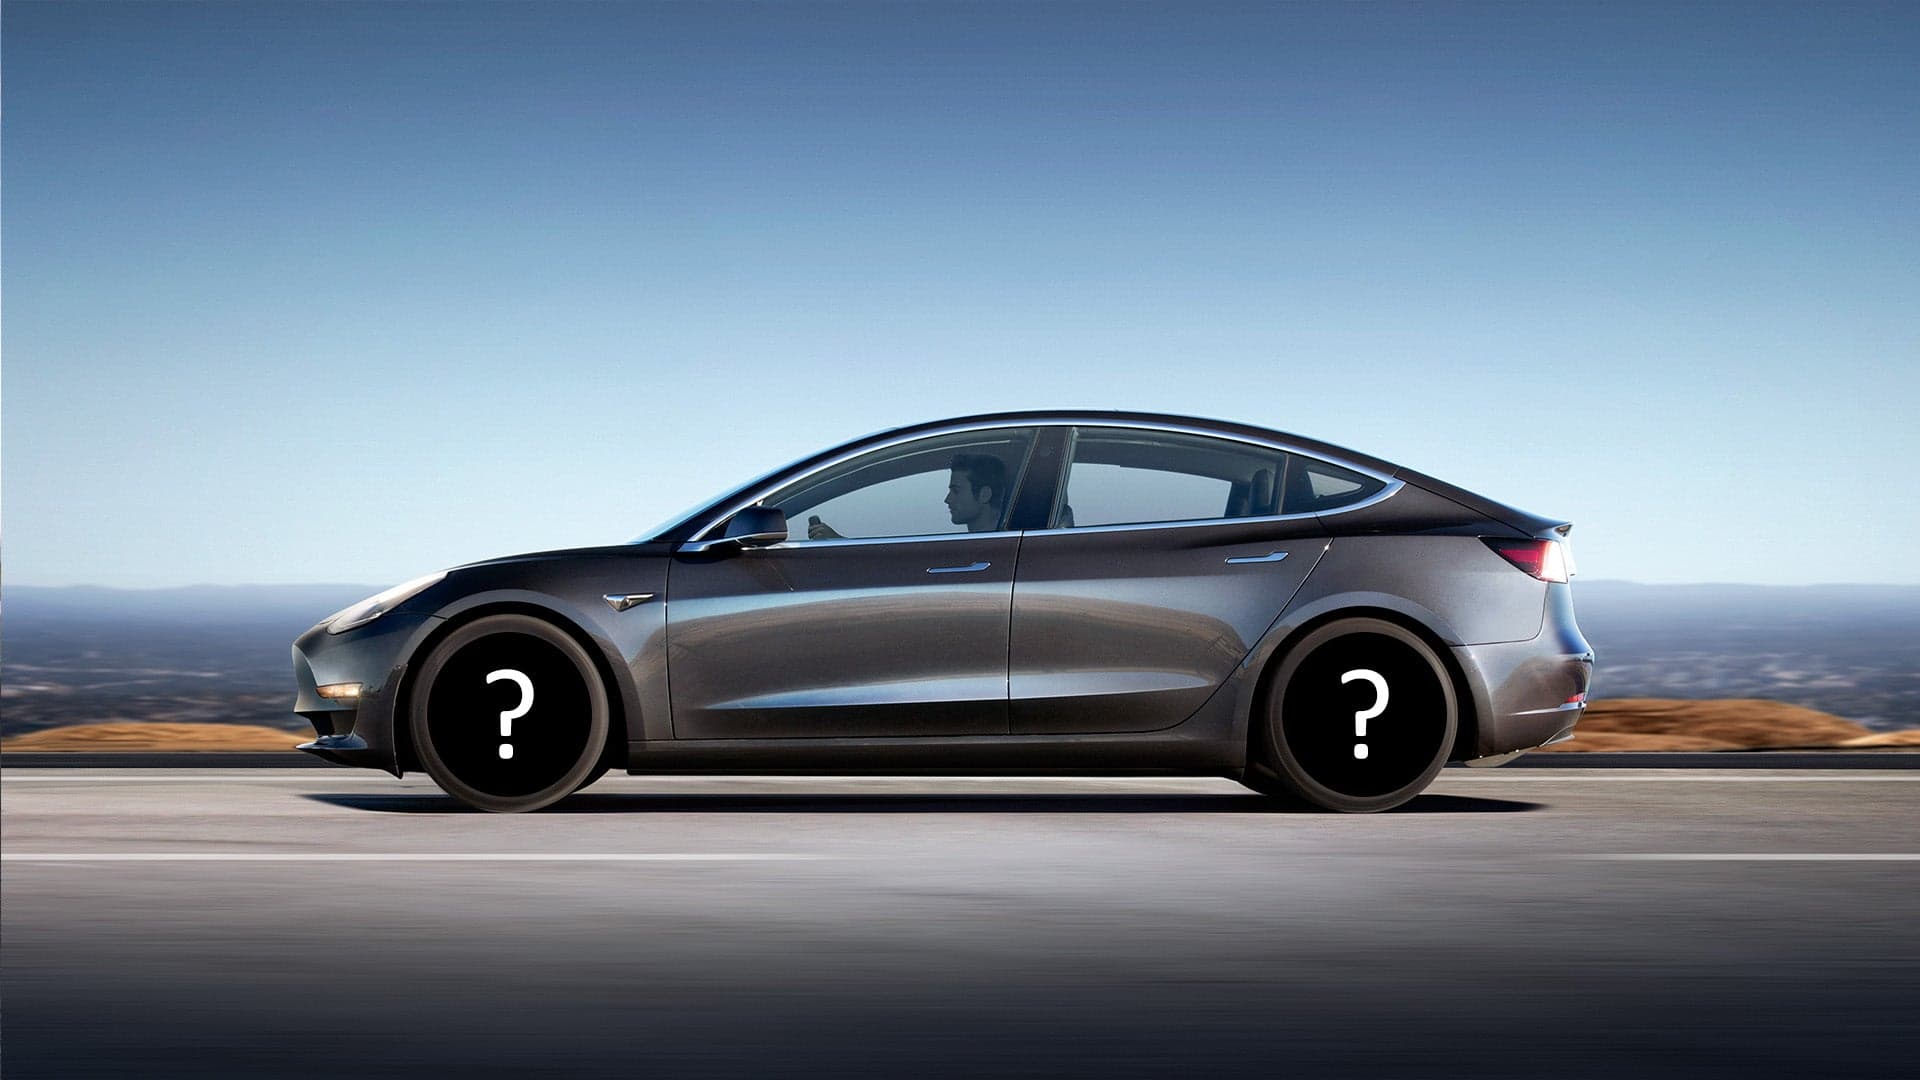 Turns Out the Tesla Model 3’s Aero Wheels Aren’t So Ugly After All